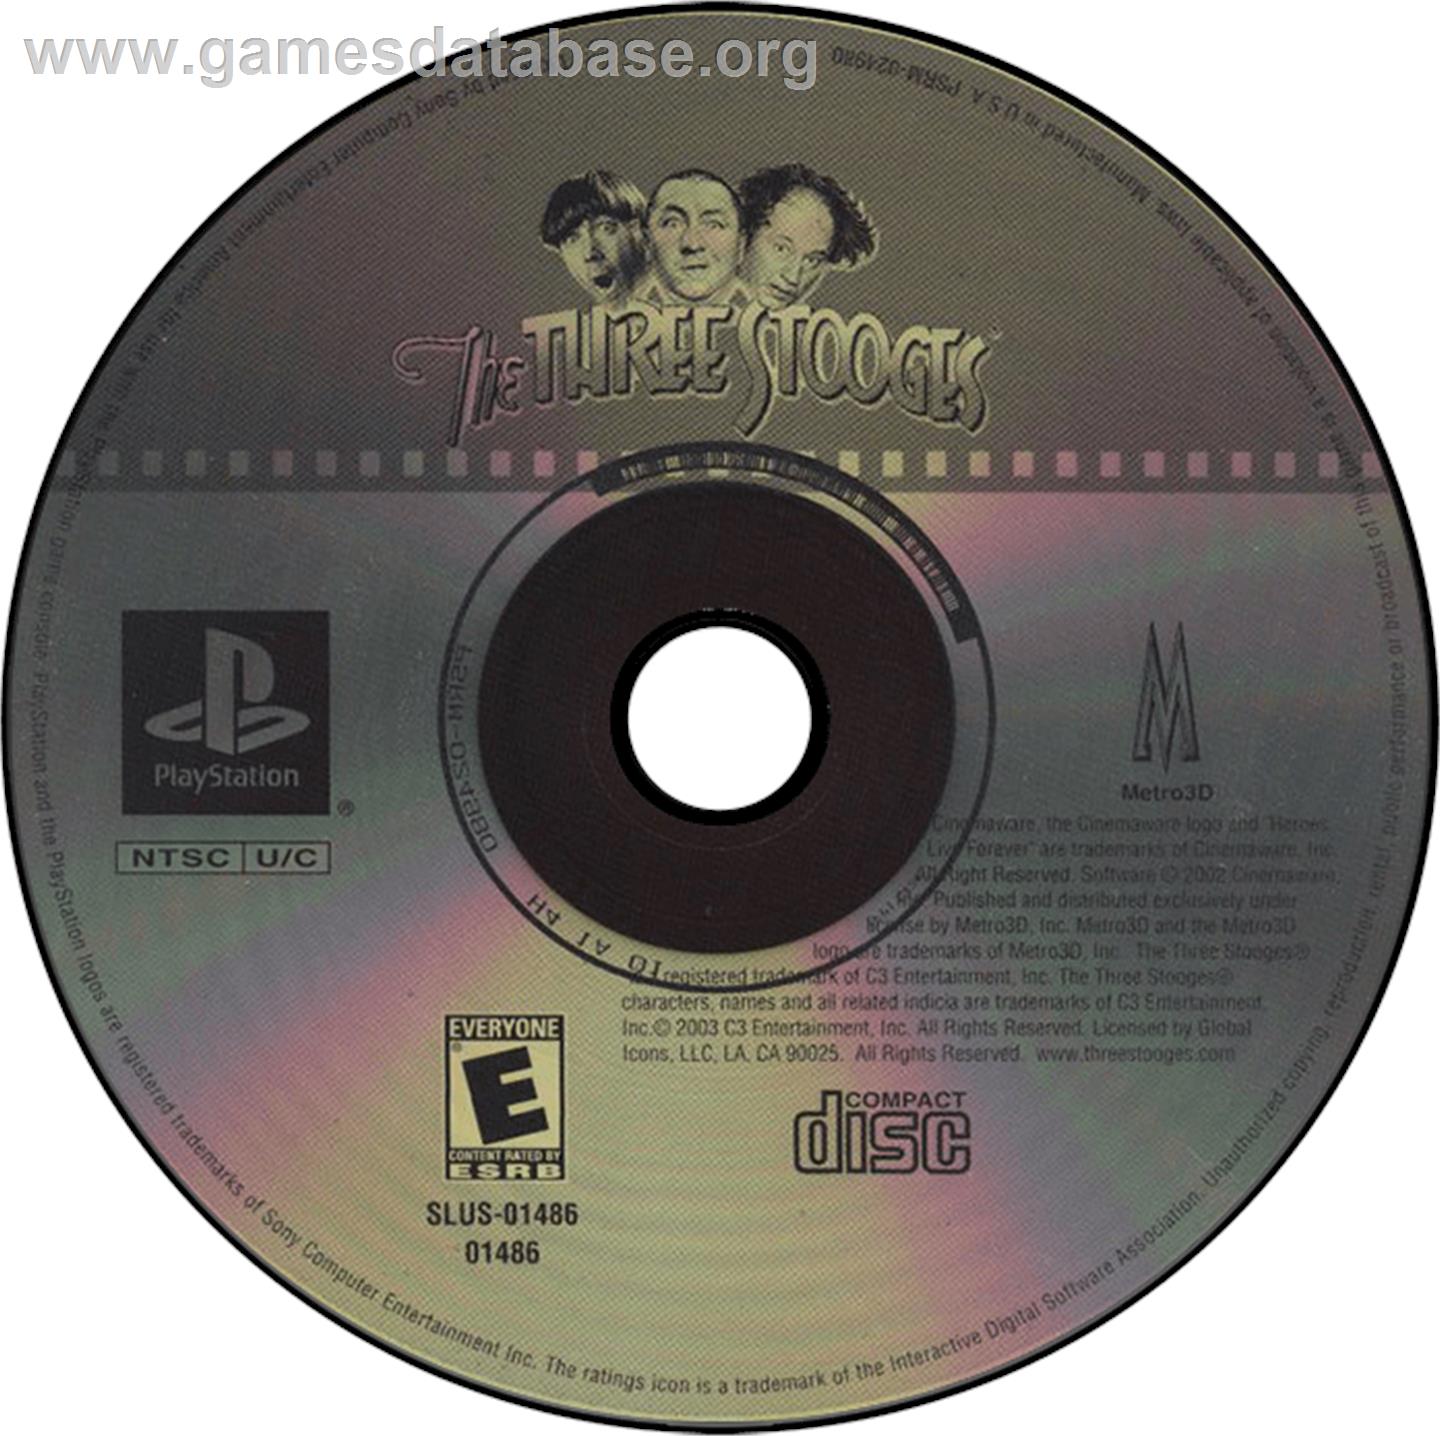 The Three Stooges - Sony Playstation - Artwork - Disc